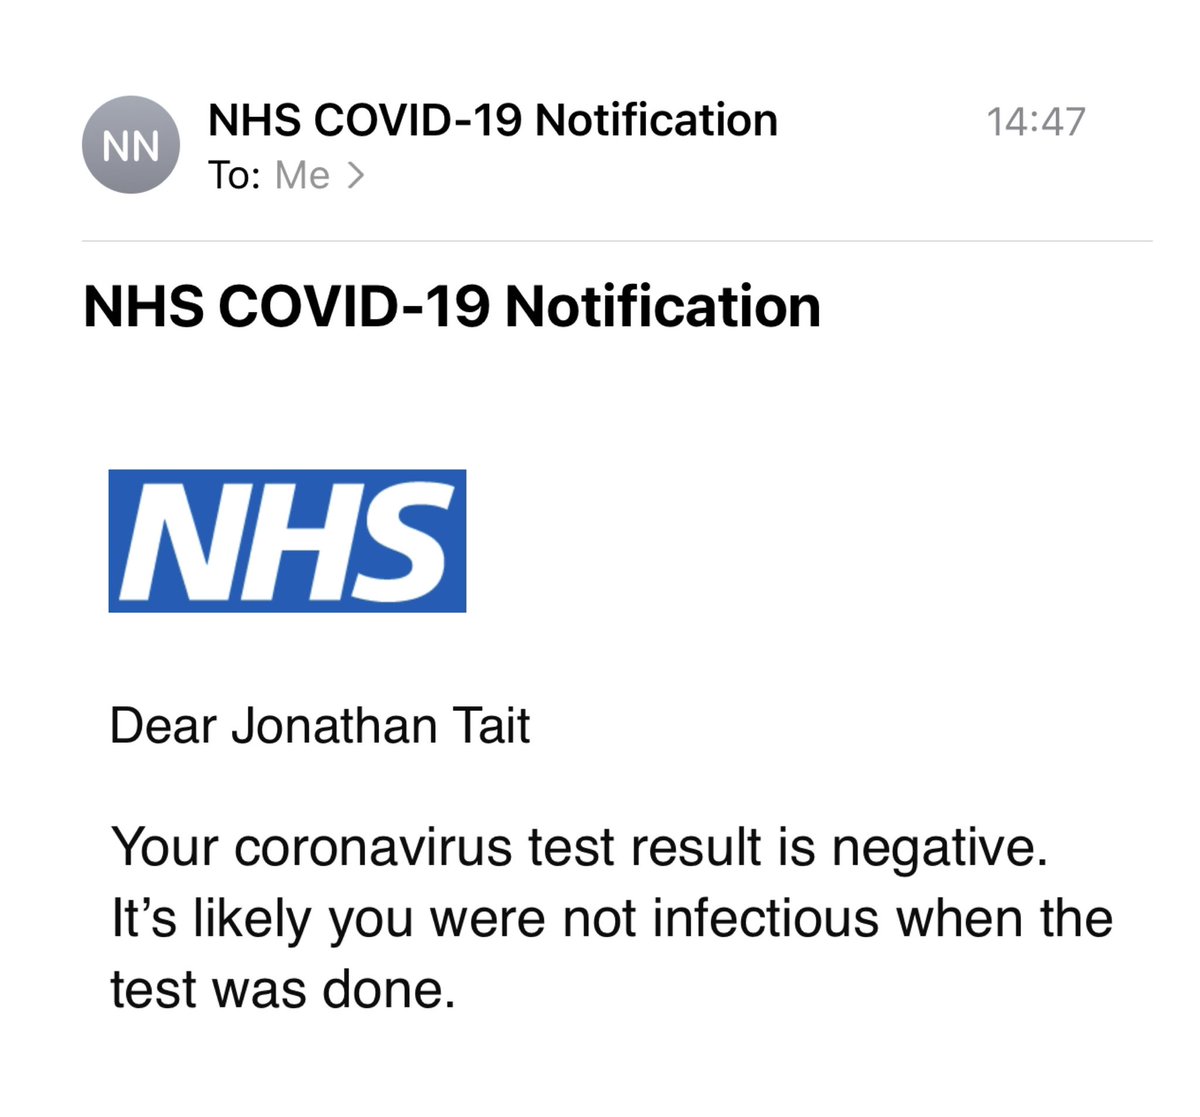 My results arrived in almost exactly 30 mins via text and email. Pretty efficient, as long as it’s accurate.